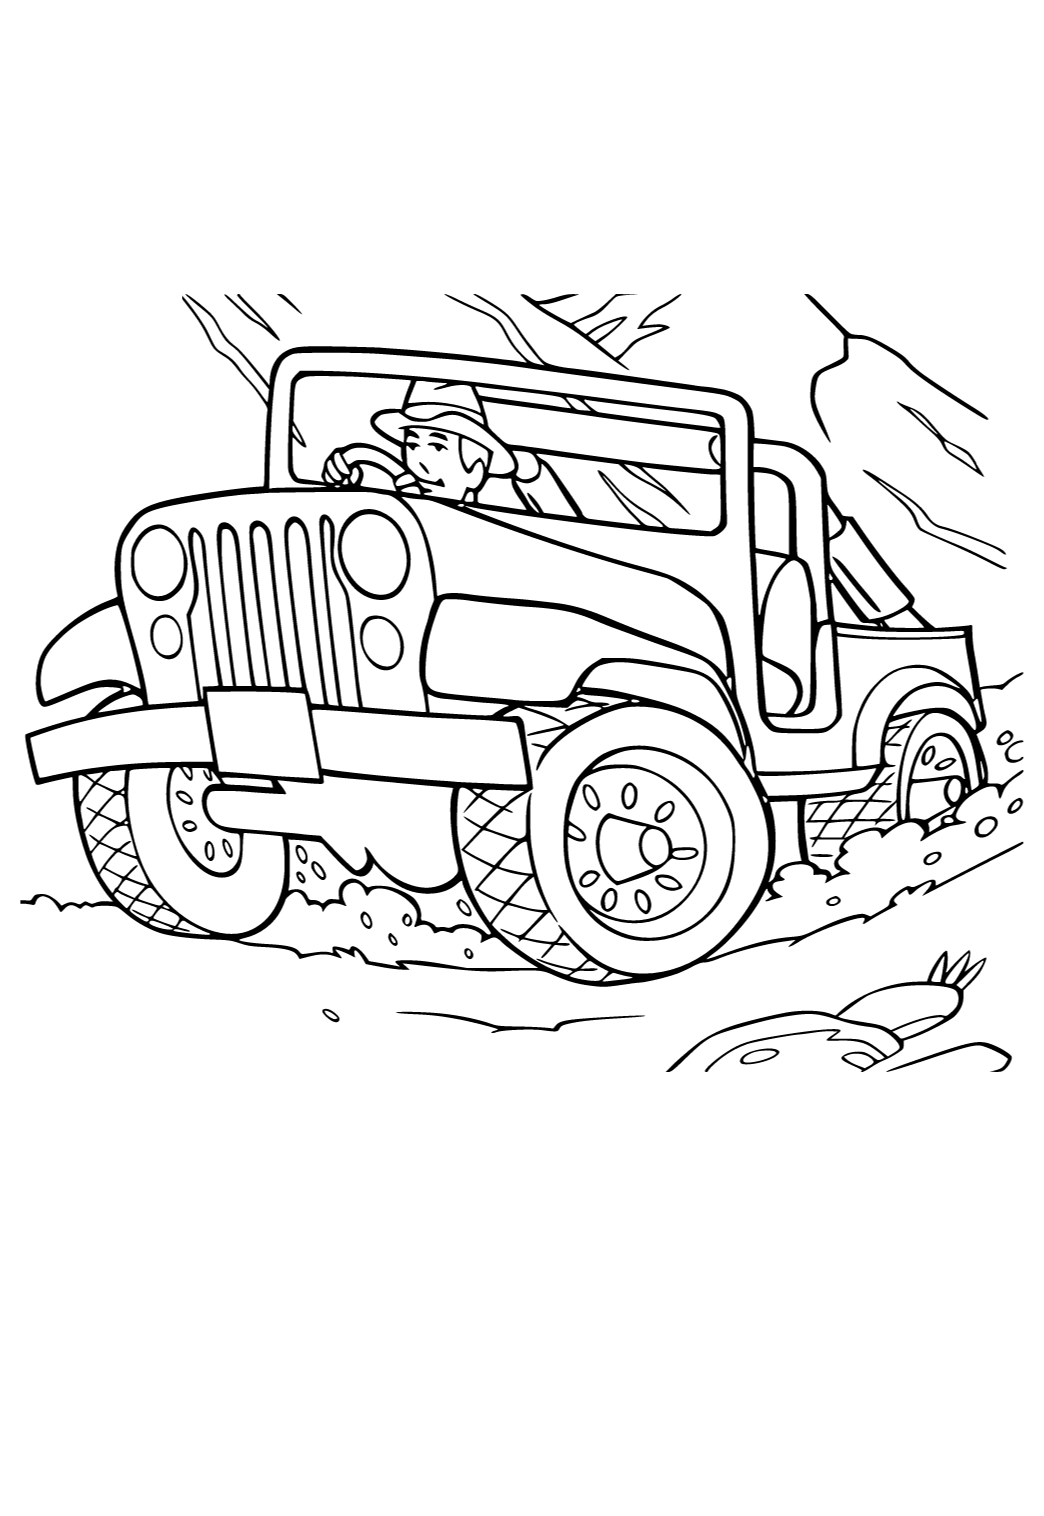 Free printable jeep road coloring page for adults and kids